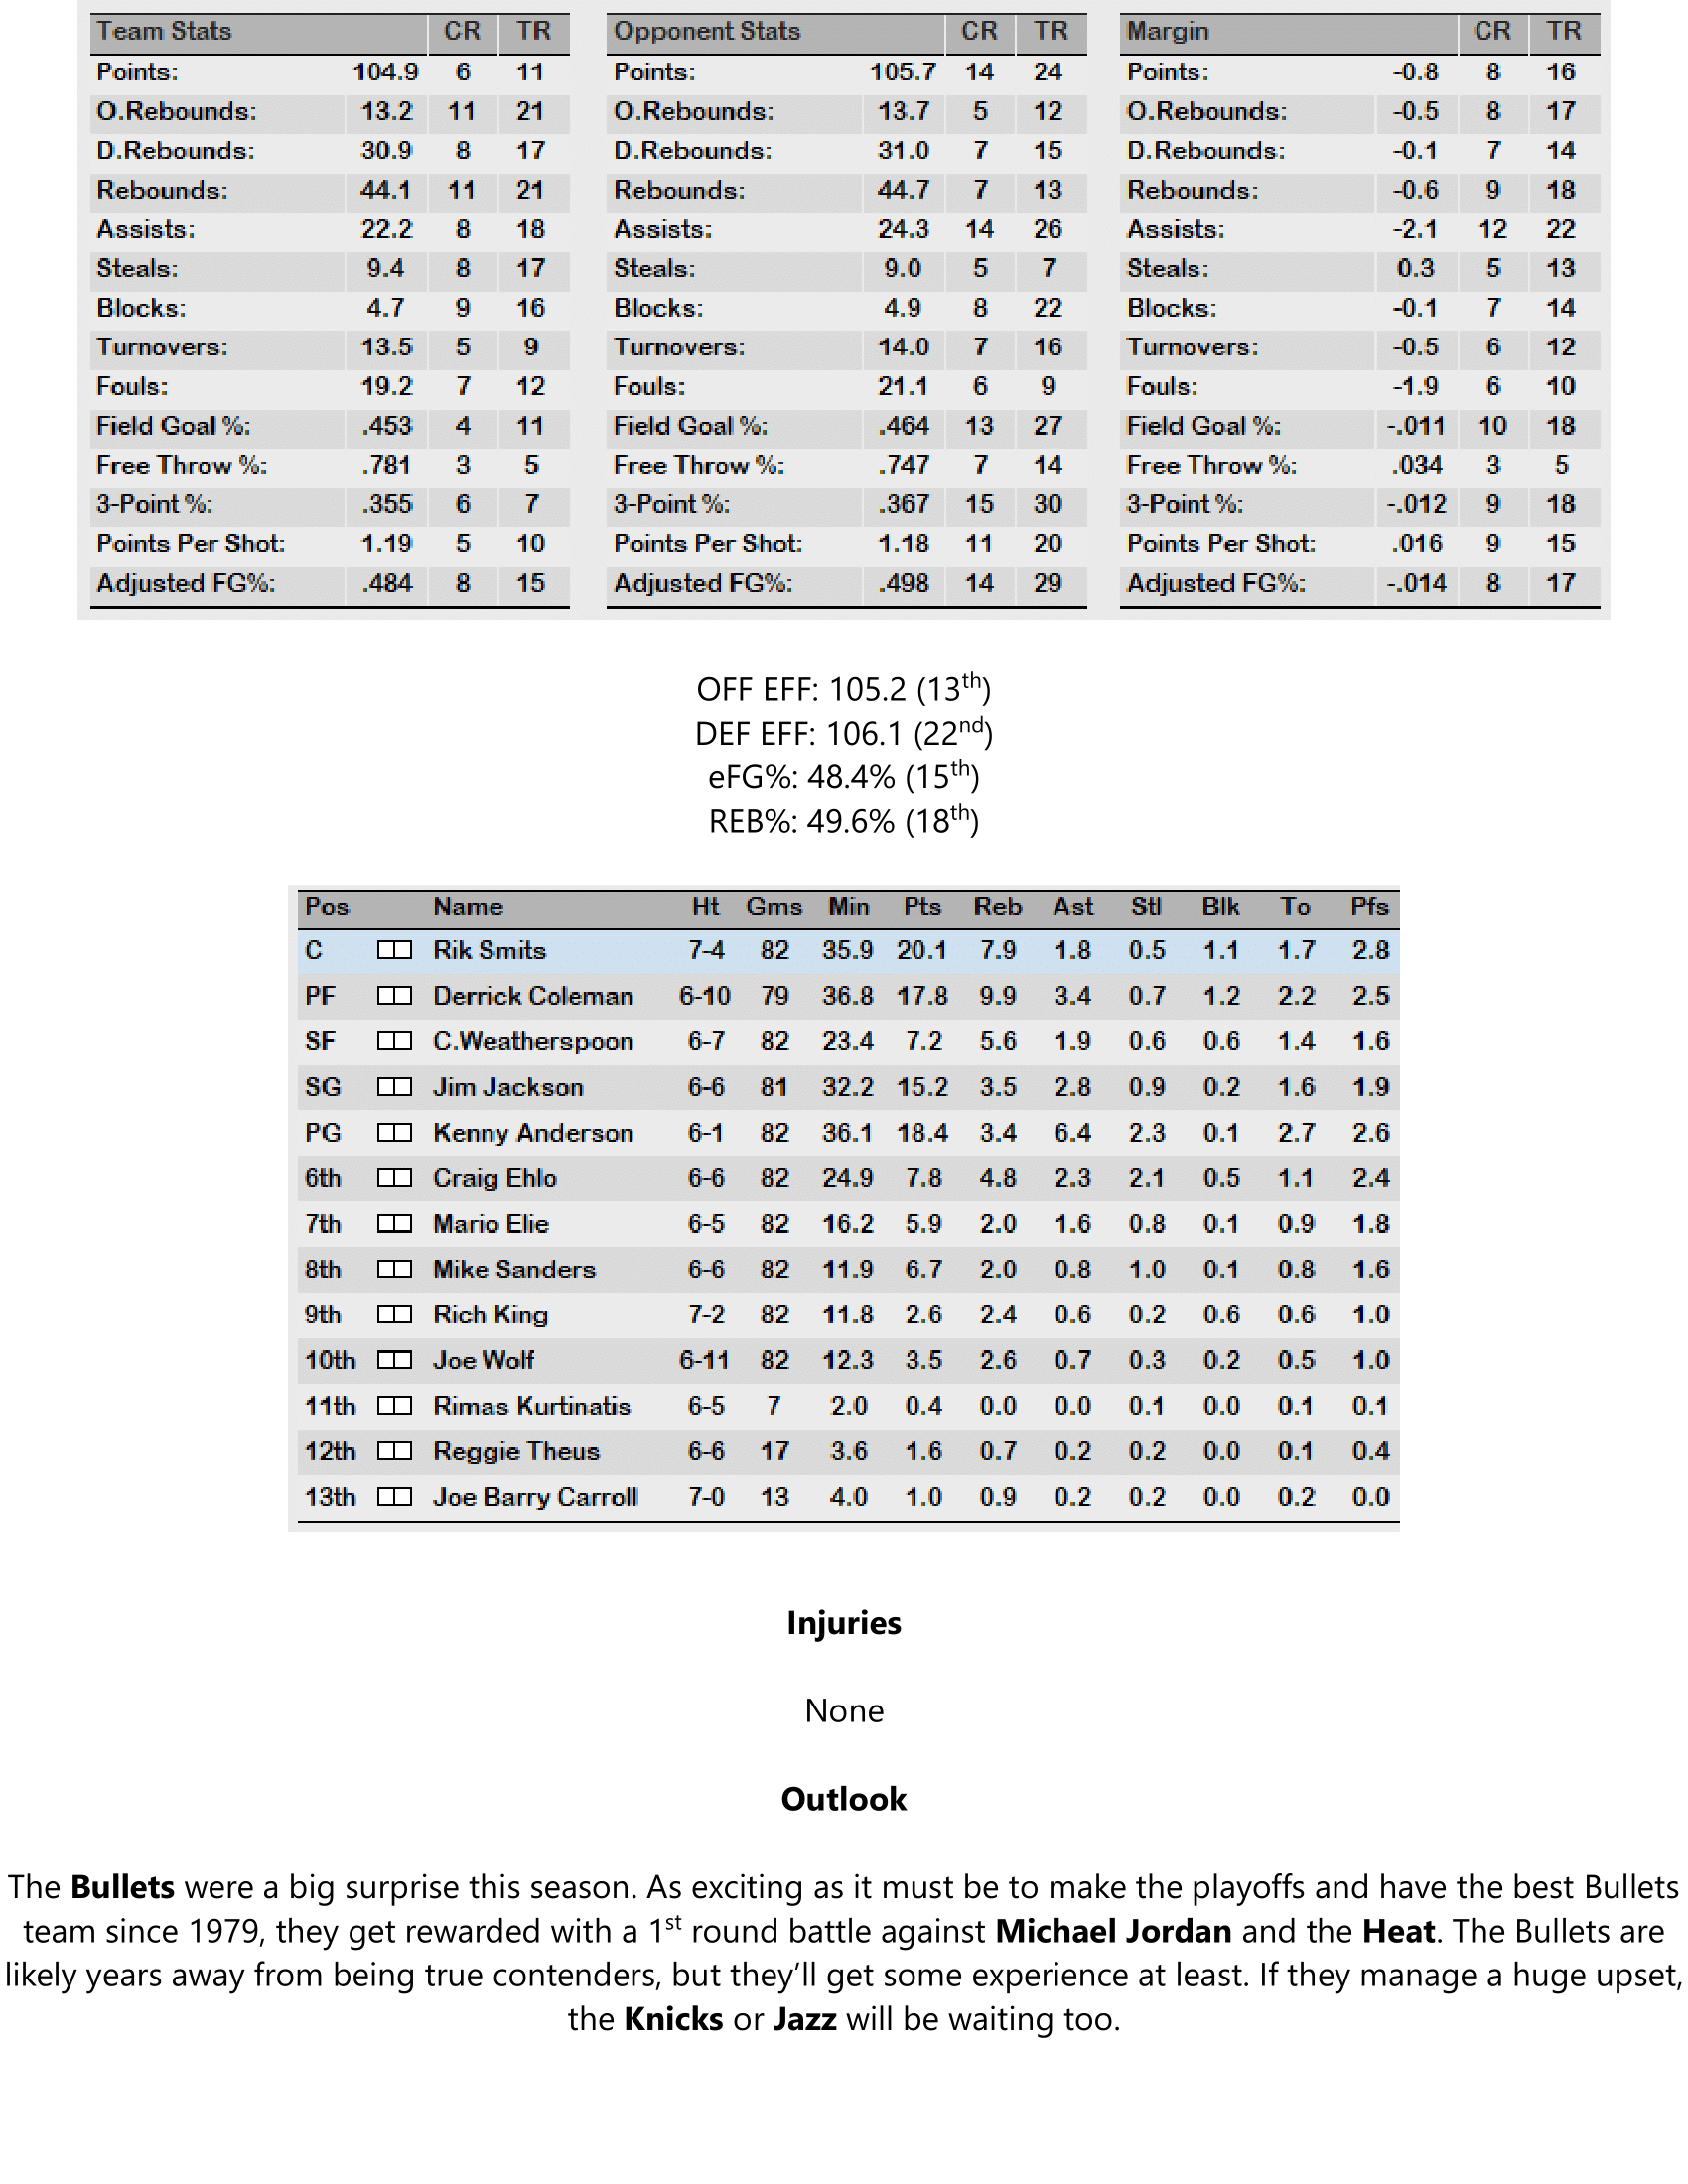 92-93-Part-4-Playoff-Preview-22.png